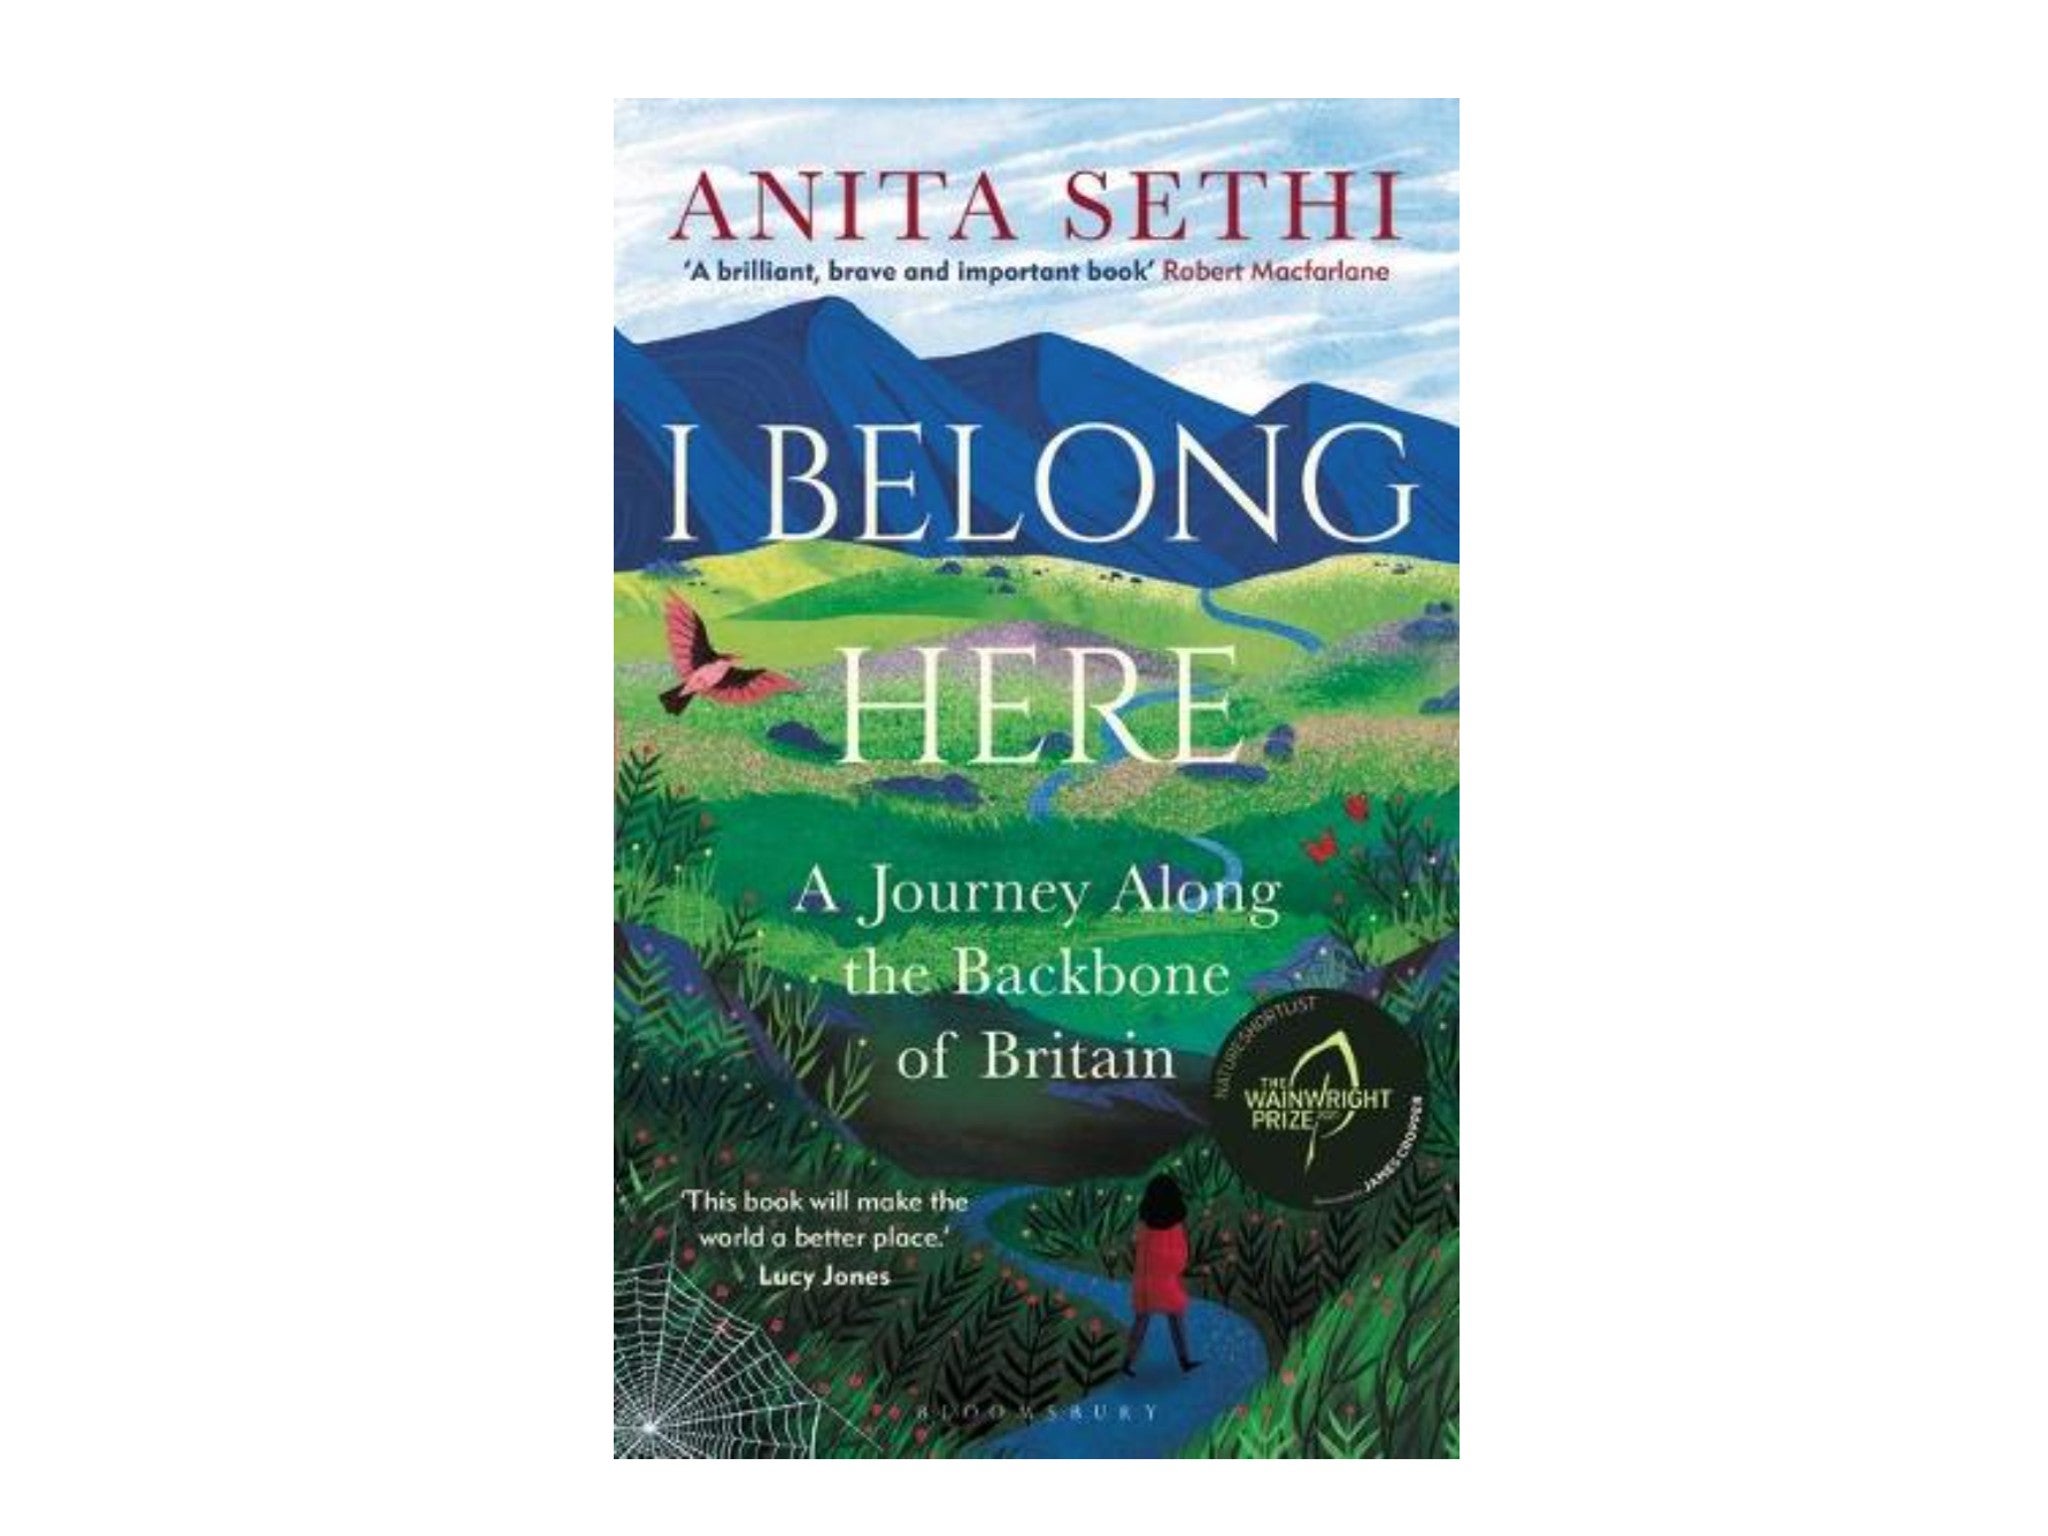 ‘I Belong Here- A Journey Along the Backbone of Britain’ by Anita Sethi, published by Bloomsbury indybest.jpg